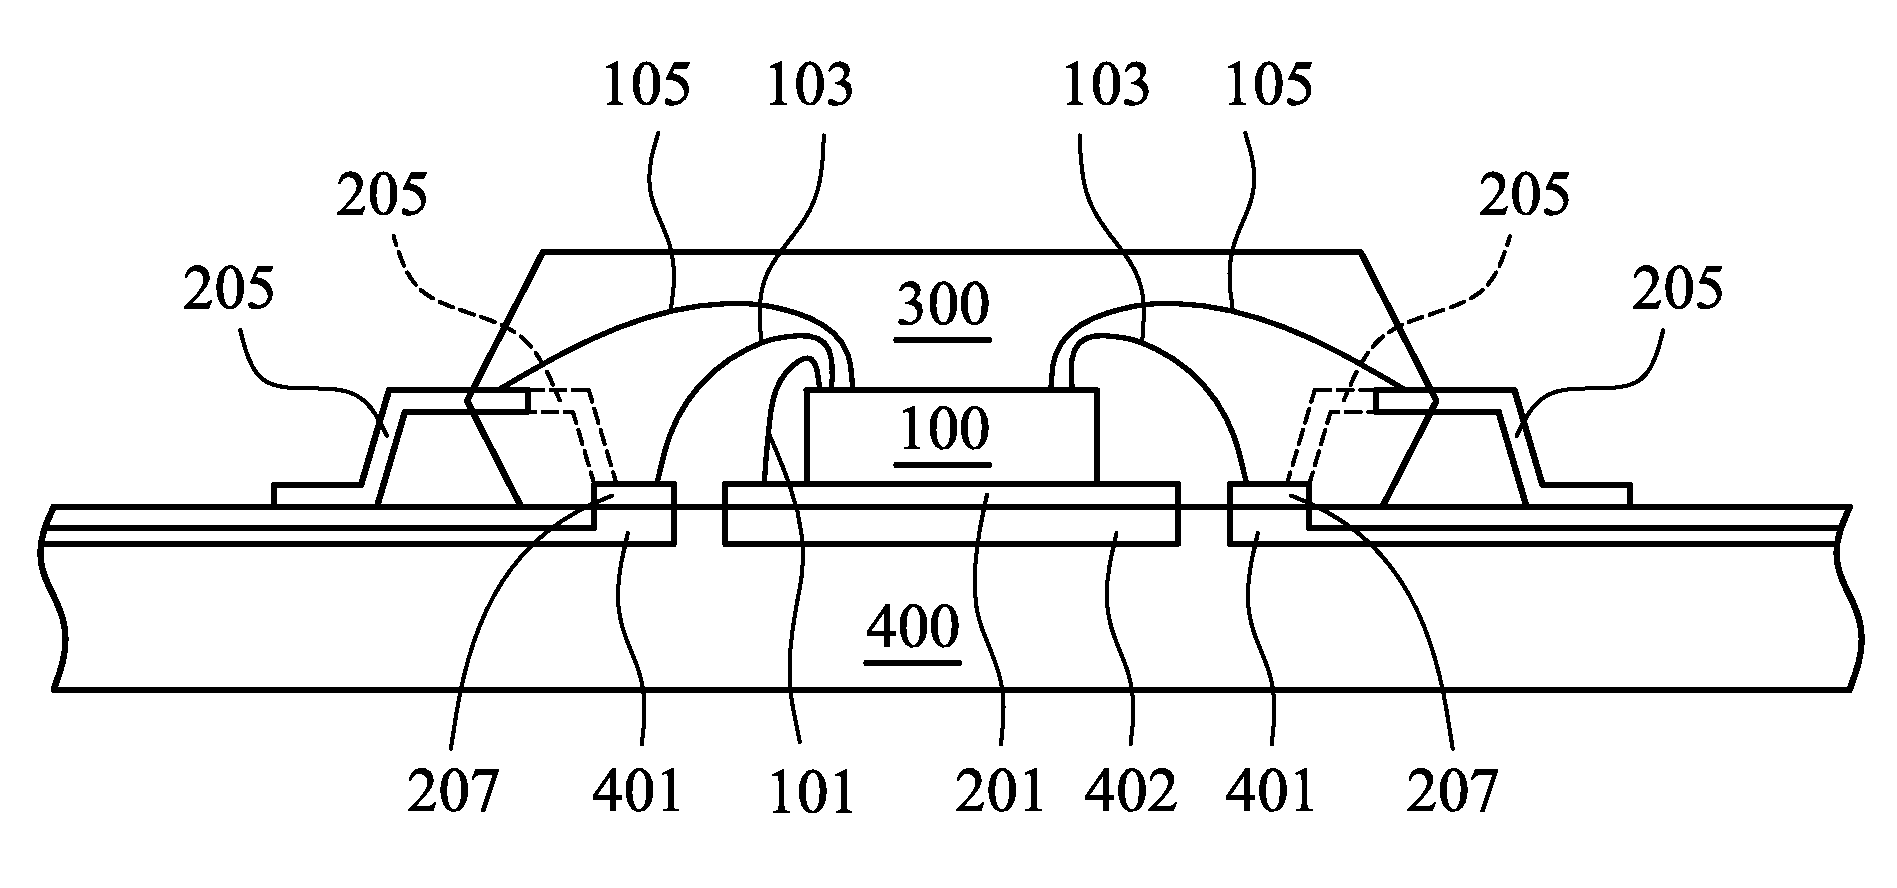 Quad flat package with exposed common electrode bars